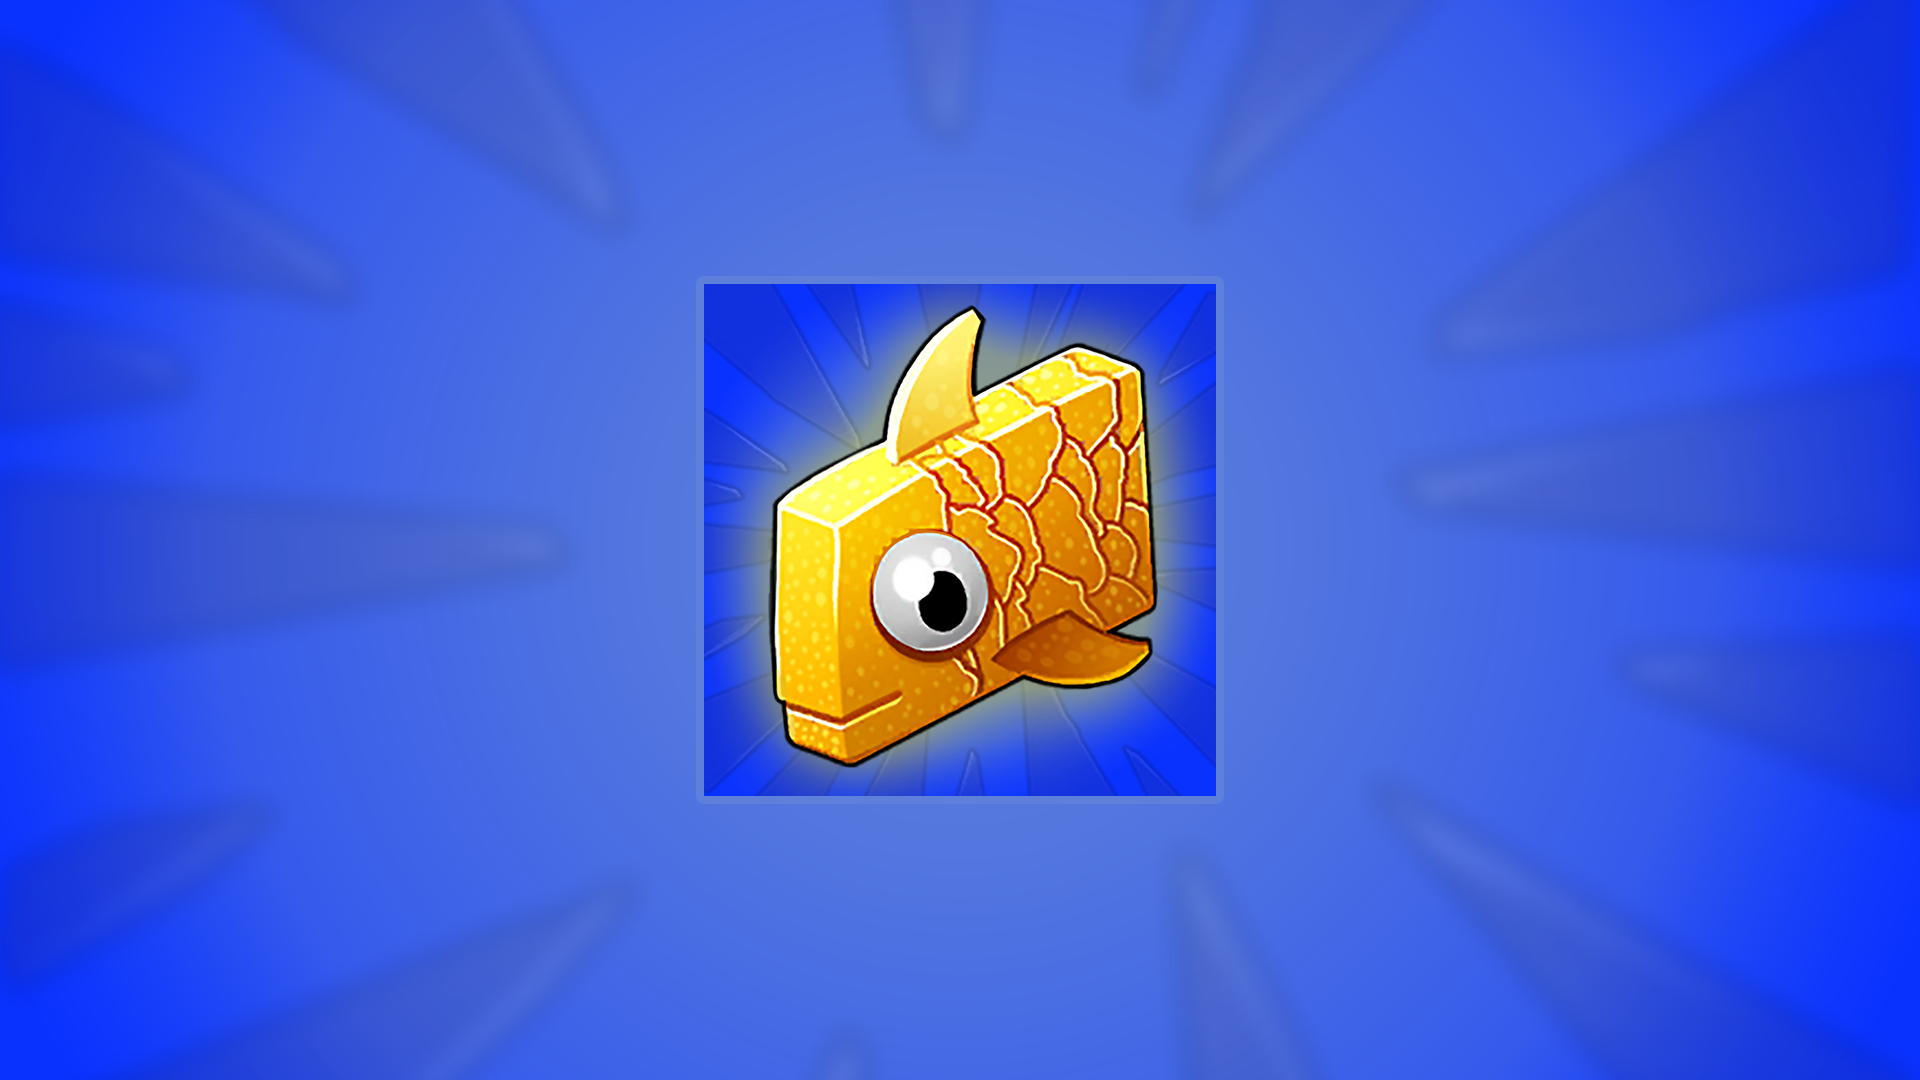 Icon for Other fish to fry